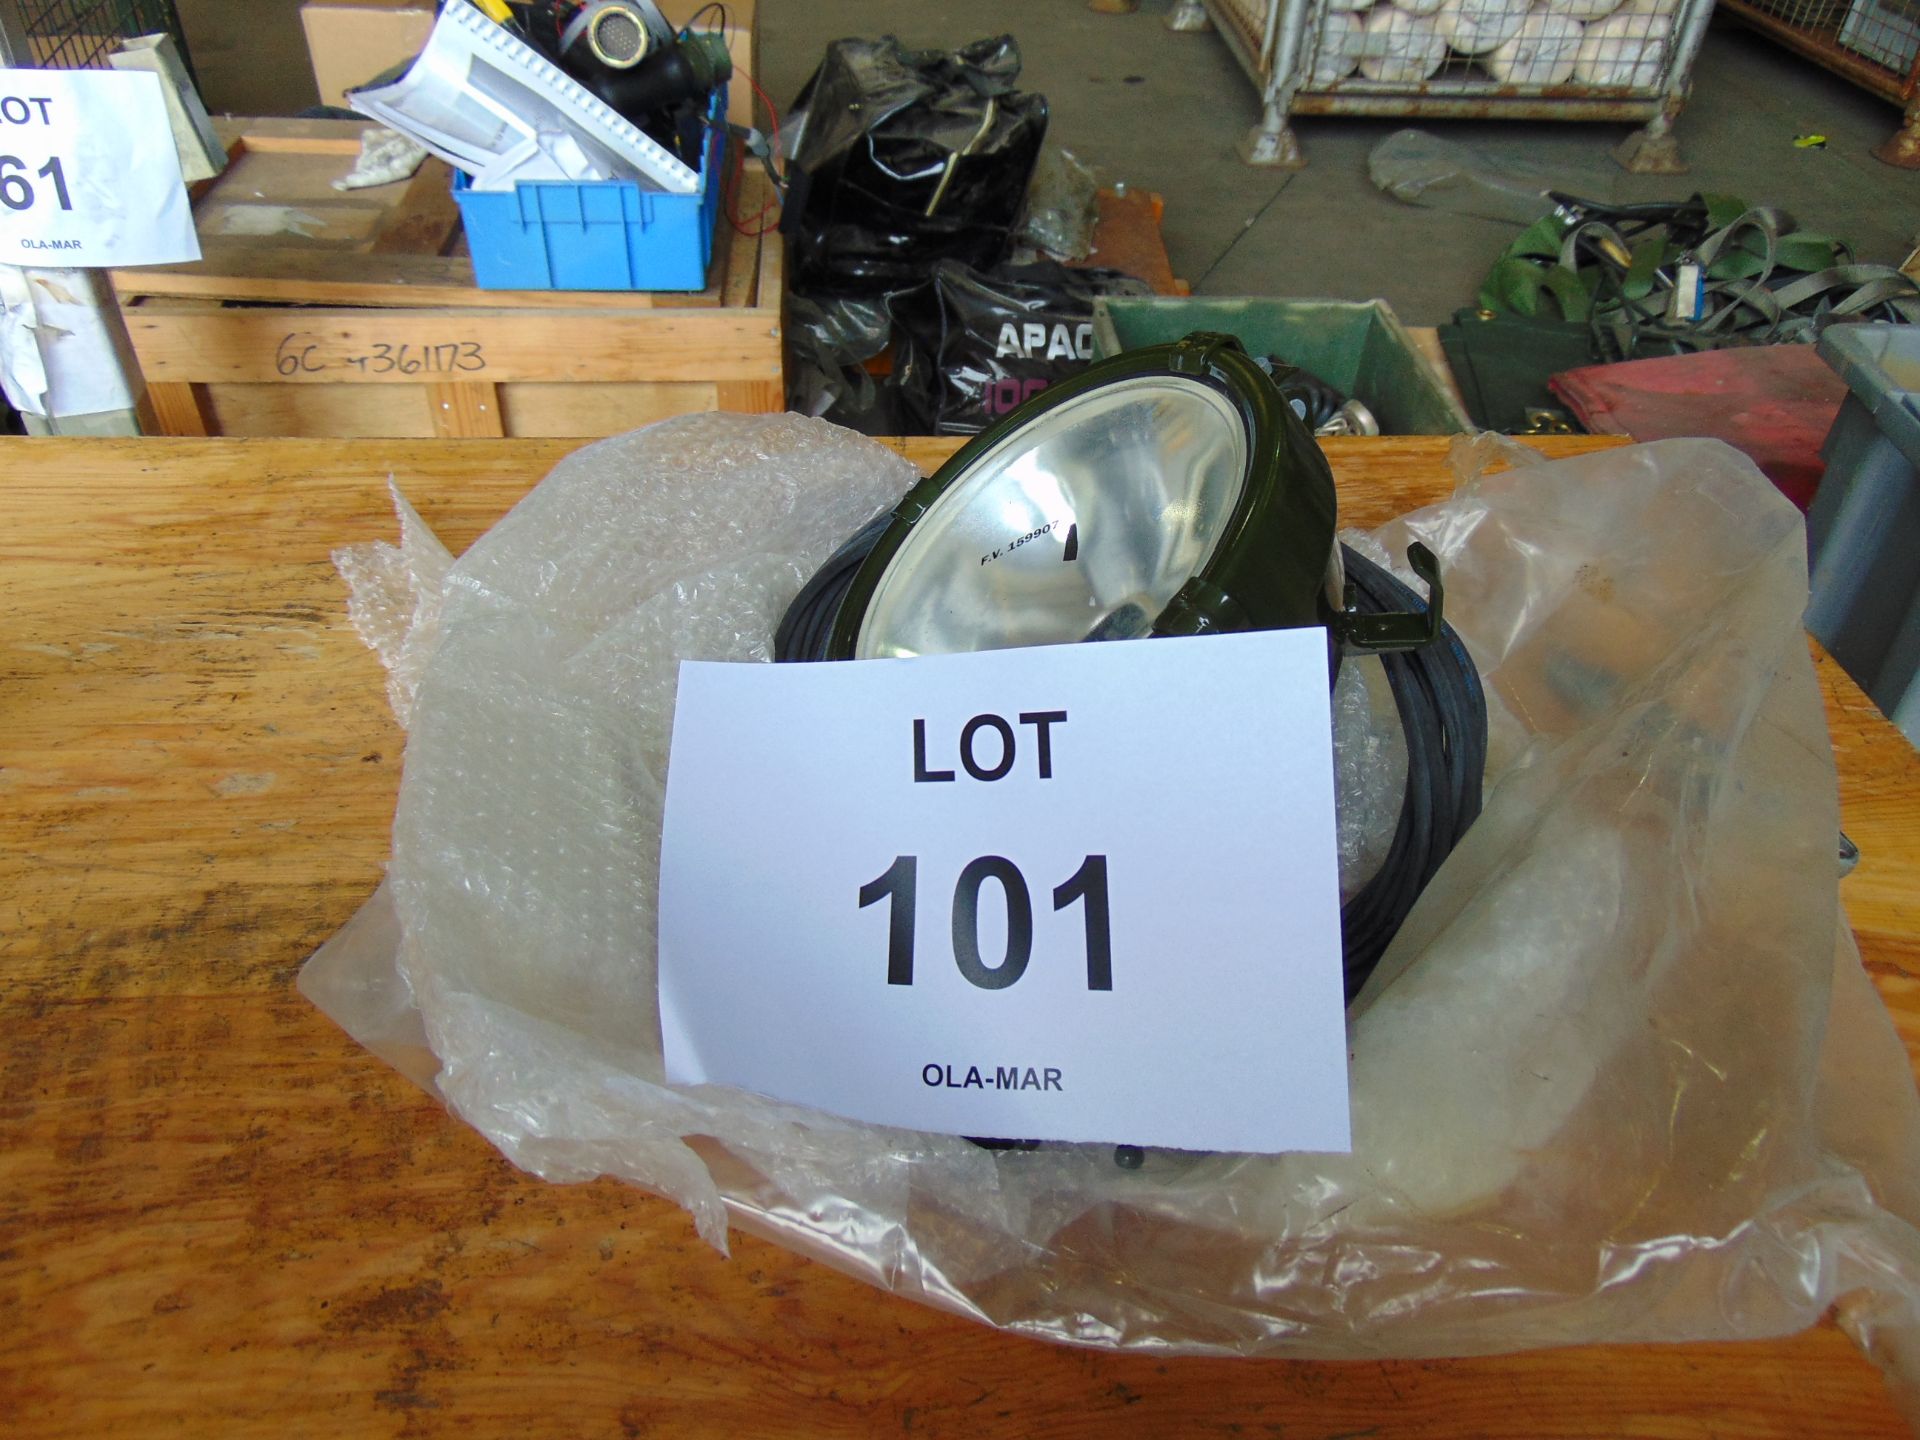 New Unissued FV159907 Vehicle Search Light c/w Plug and Mounting Brackets in Original Packing - Image 8 of 8